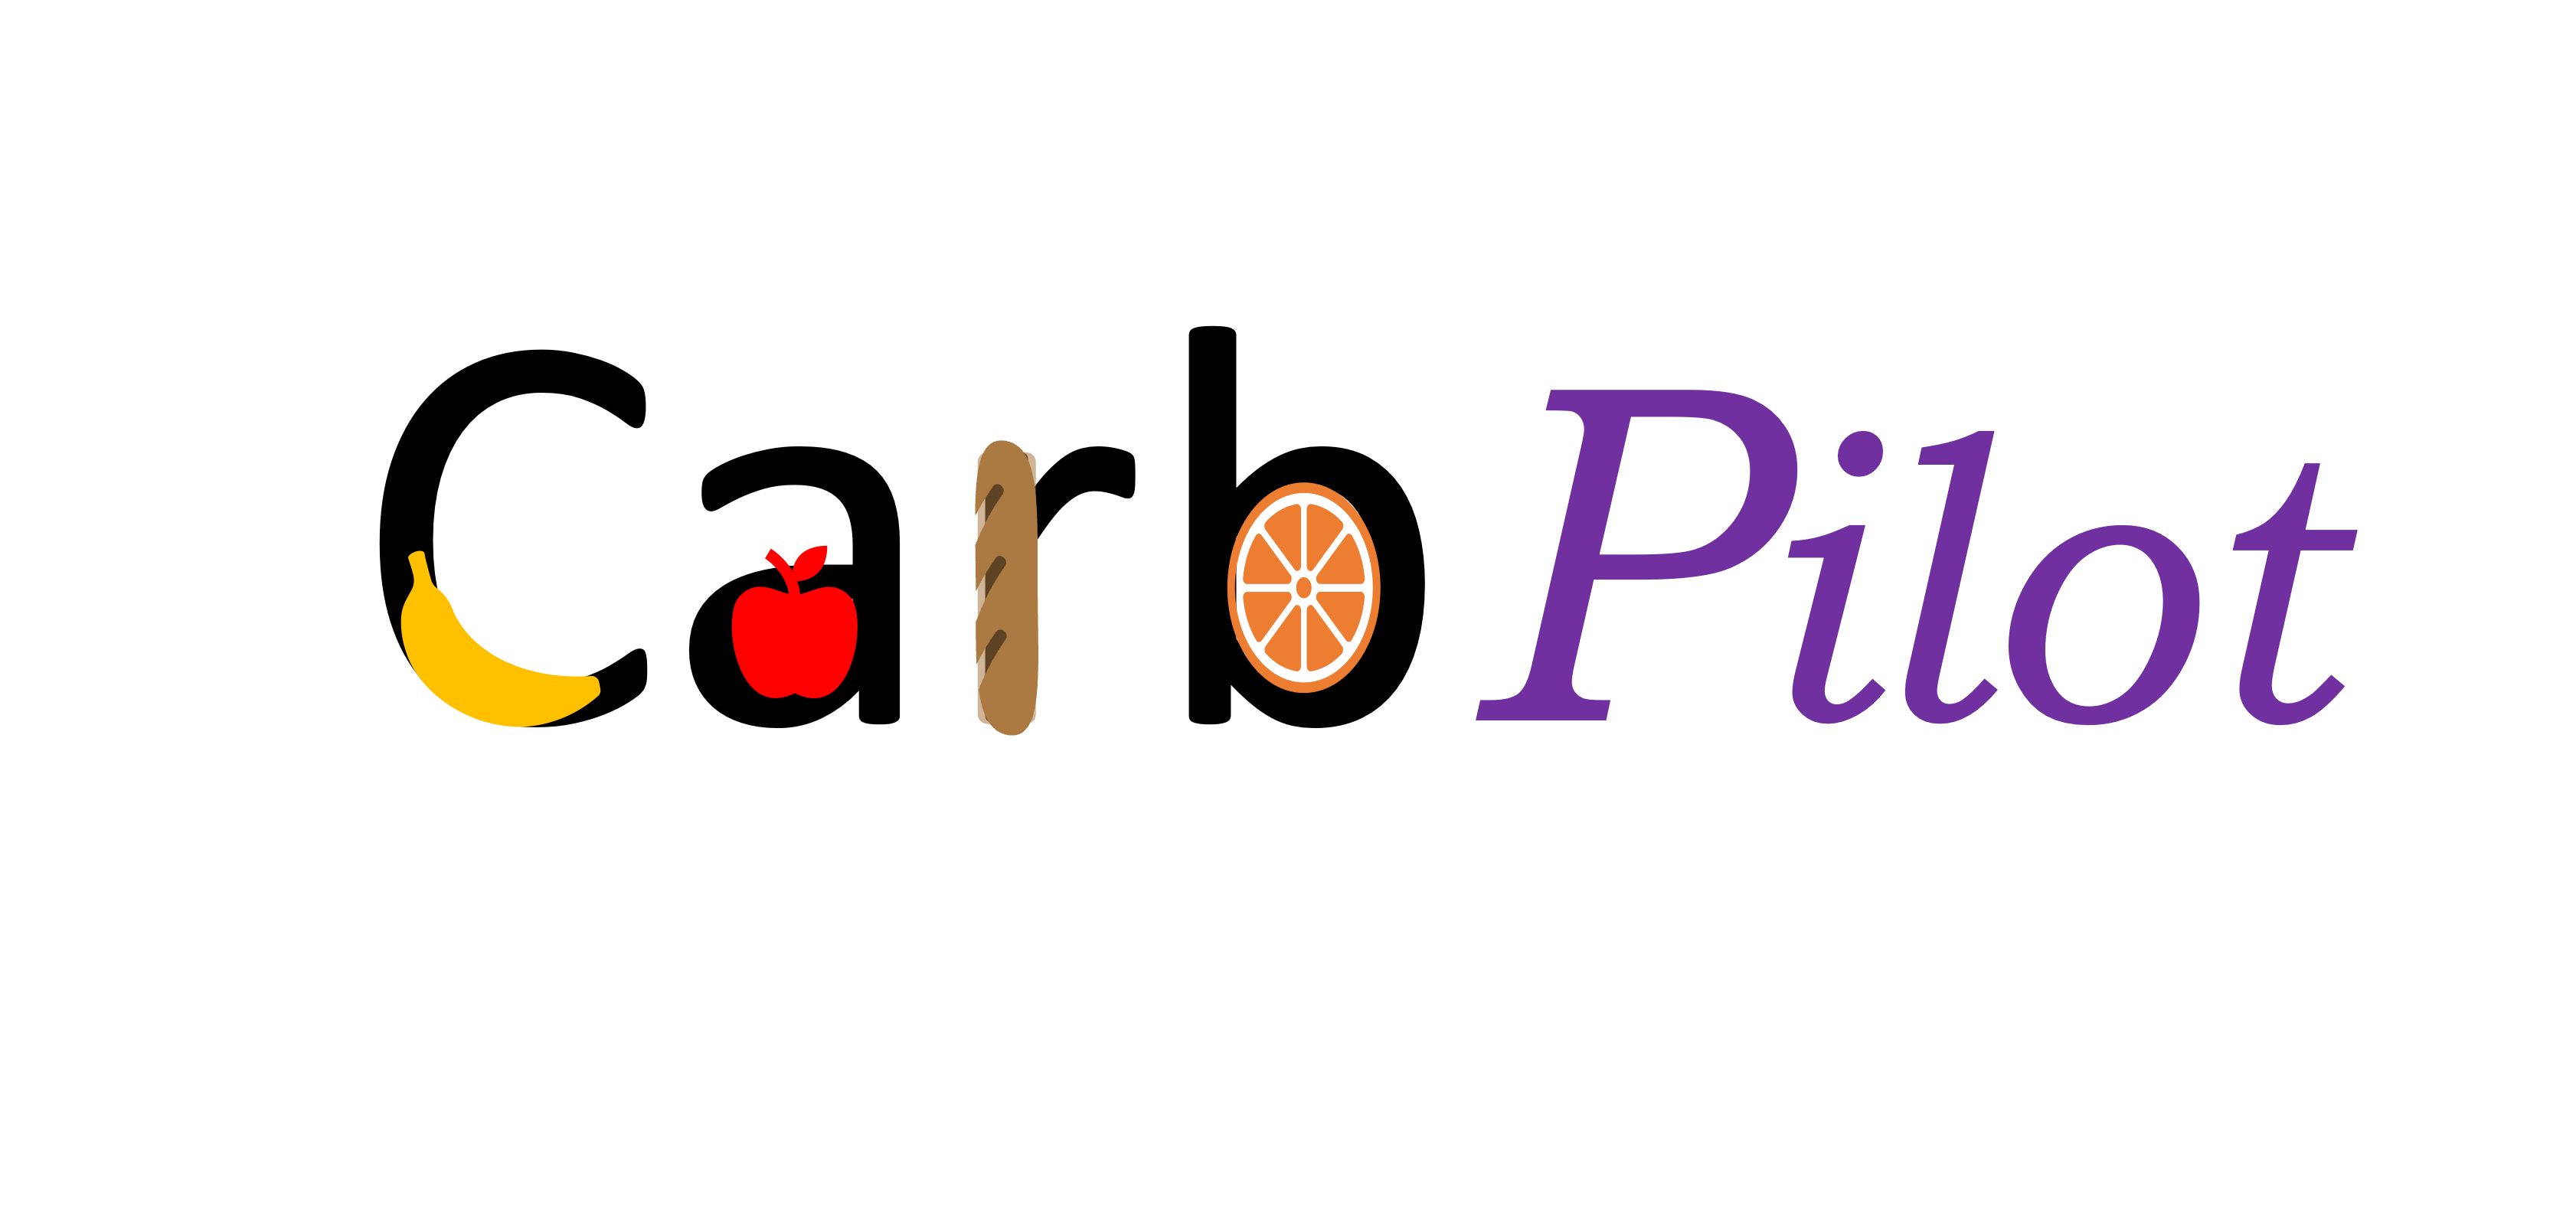 The Carb Pilot logo, which has pieces of fruit on the letters of the word "Carb". Pilot is written in italic script in purple font.